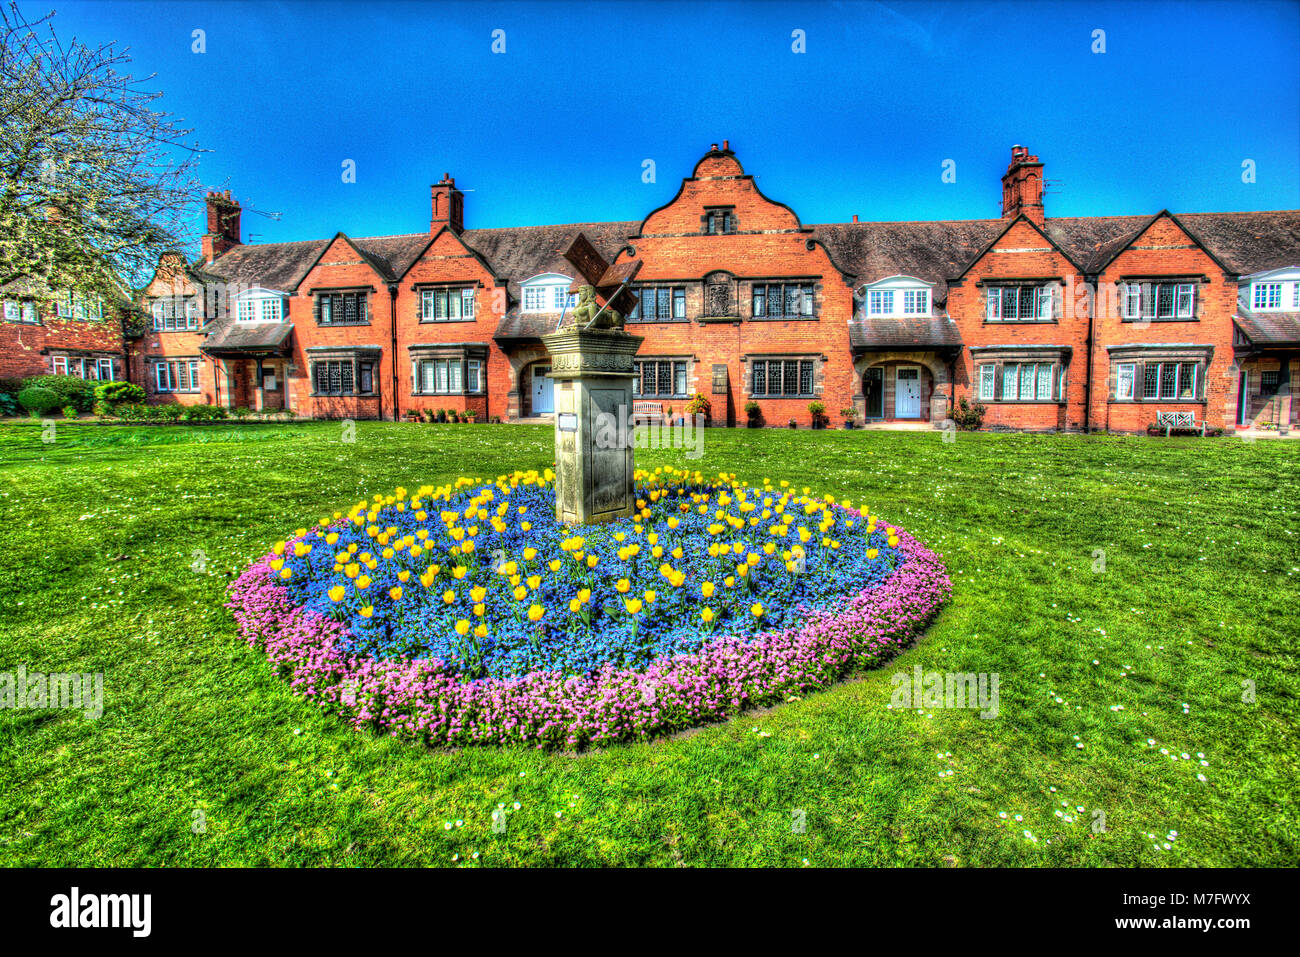 Village of Port Sunlight, England. Artistic view of the New Millennium Sphinx Sundial, with bath Street Cottages in the background. Stock Photo